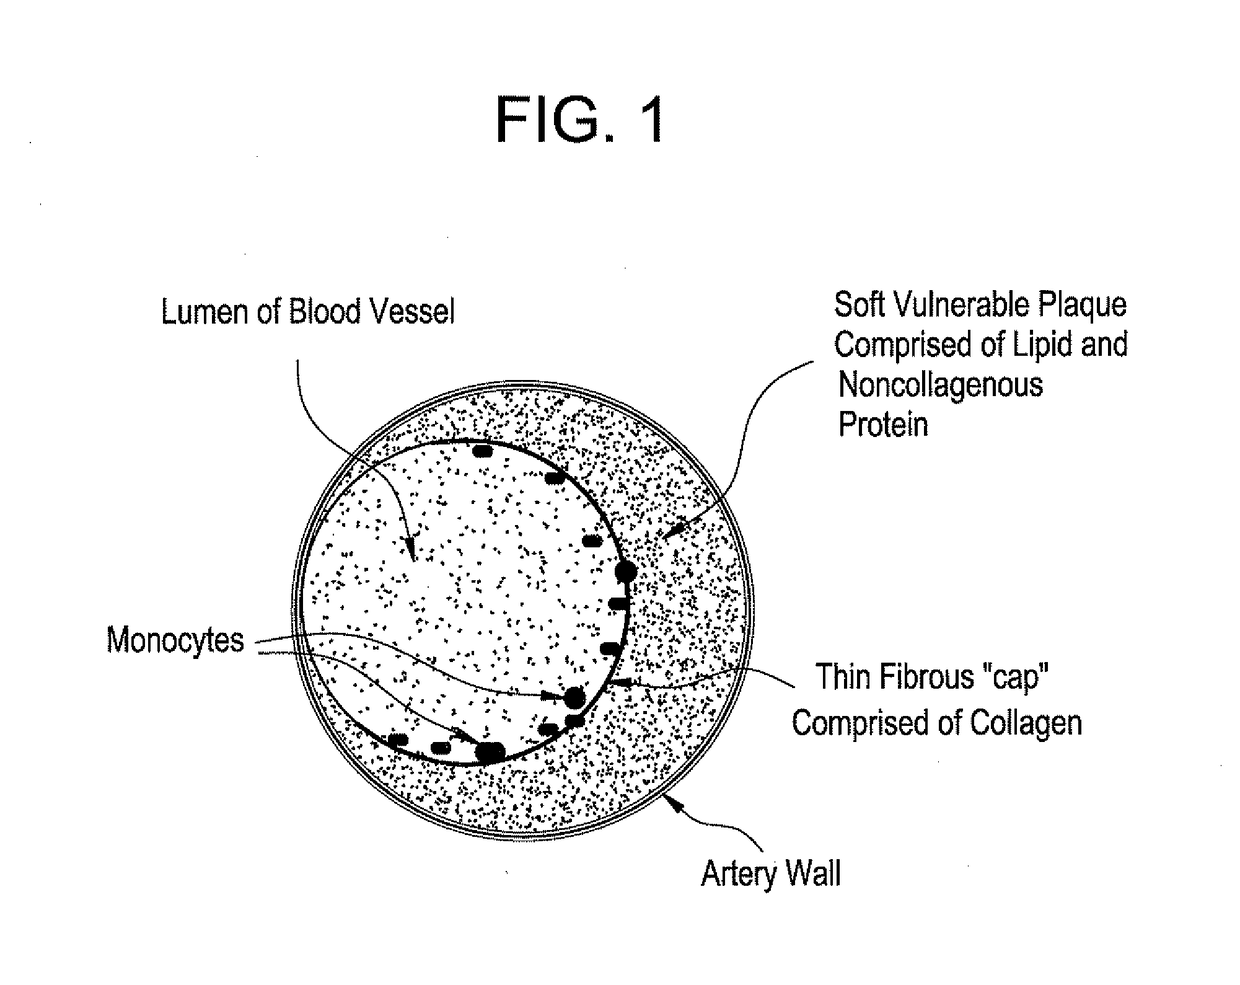 Methods and devices for treating vulnerable plaque